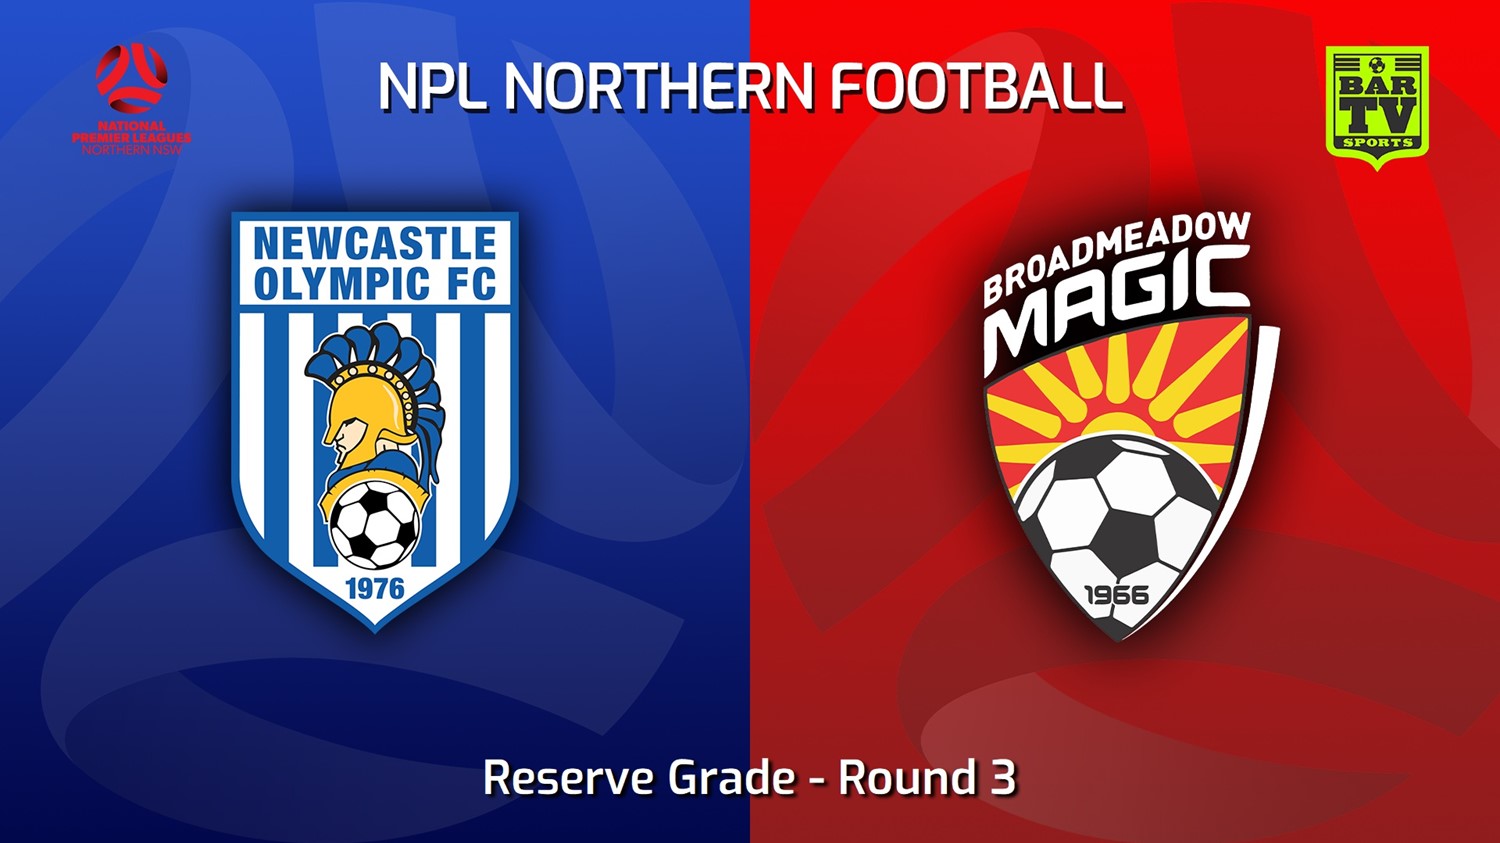 230318-NNSW NPLM Res Round 3 - Newcastle Olympic Res v Broadmeadow Magic Res Minigame Slate Image